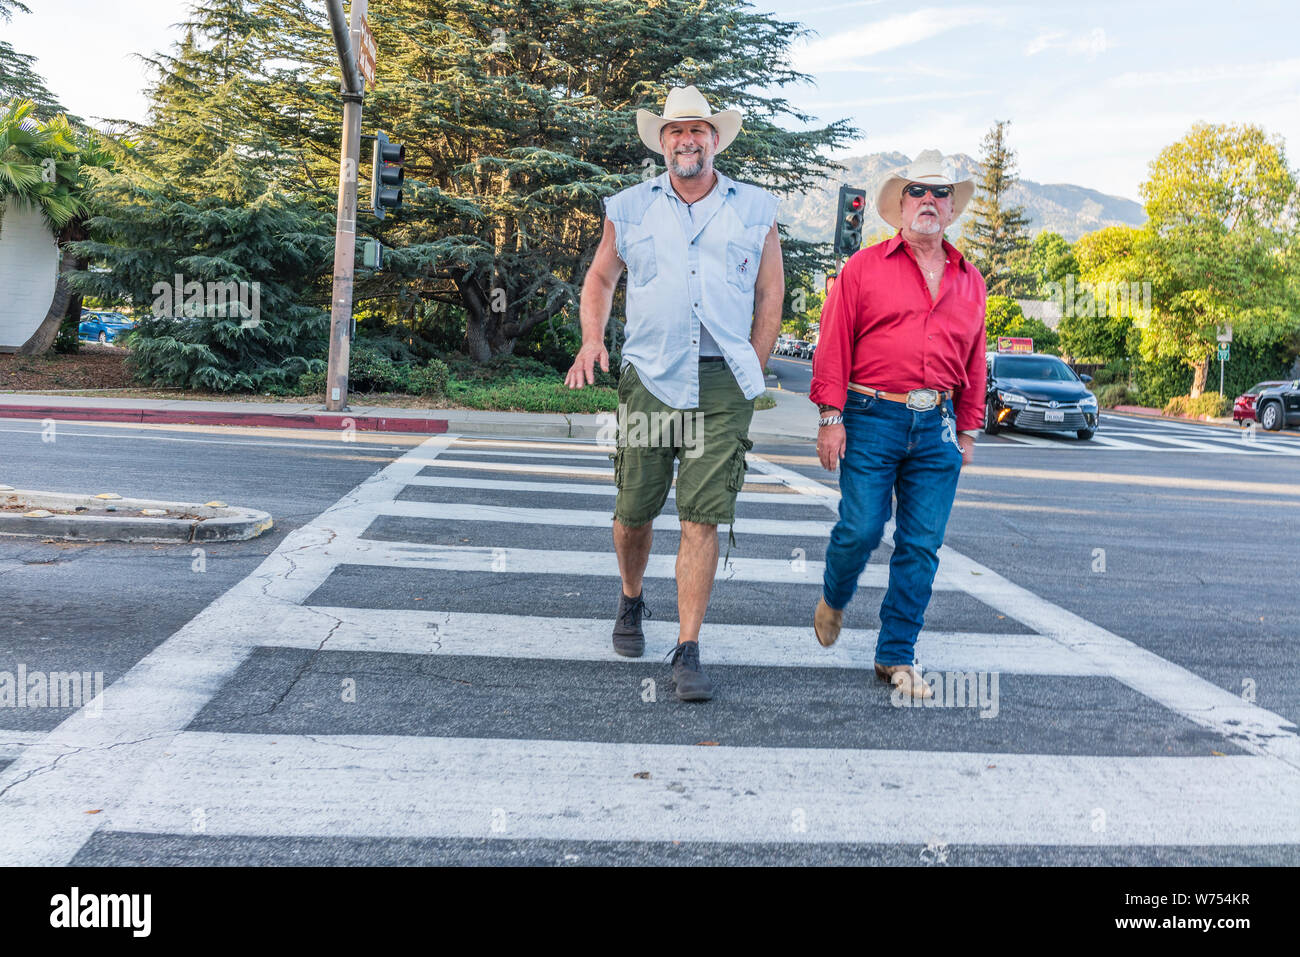 Two older male cowboys crossing State Street in Santa Barbara, California. The each wear cowboy hats, but differ in their clothing. Stock Photo